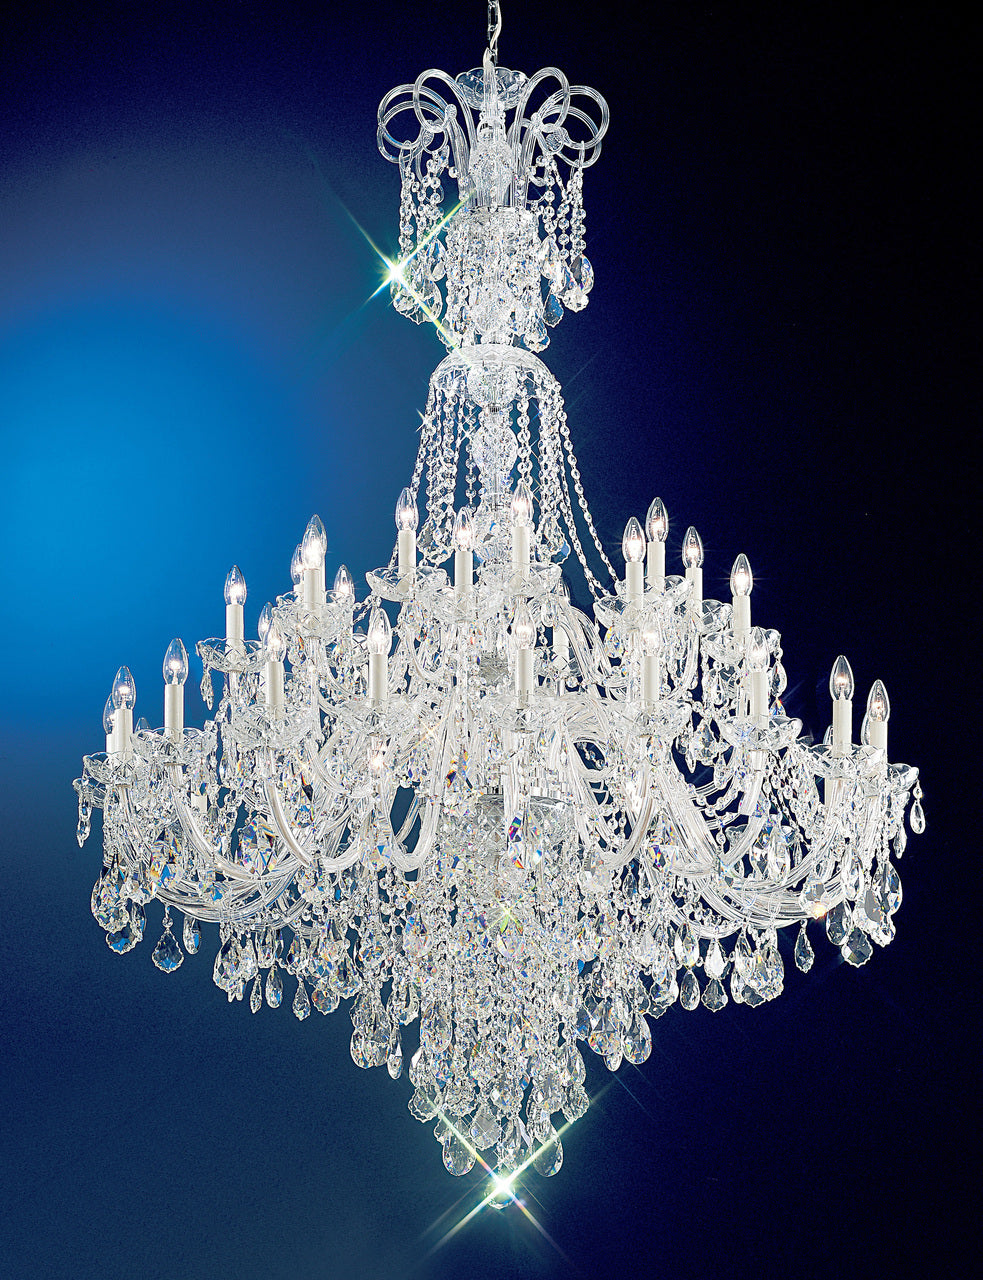 Classic Lighting 8266 G SC Bohemia Crystal/Glass Chandelier in 24k Gold (Imported from Italy)